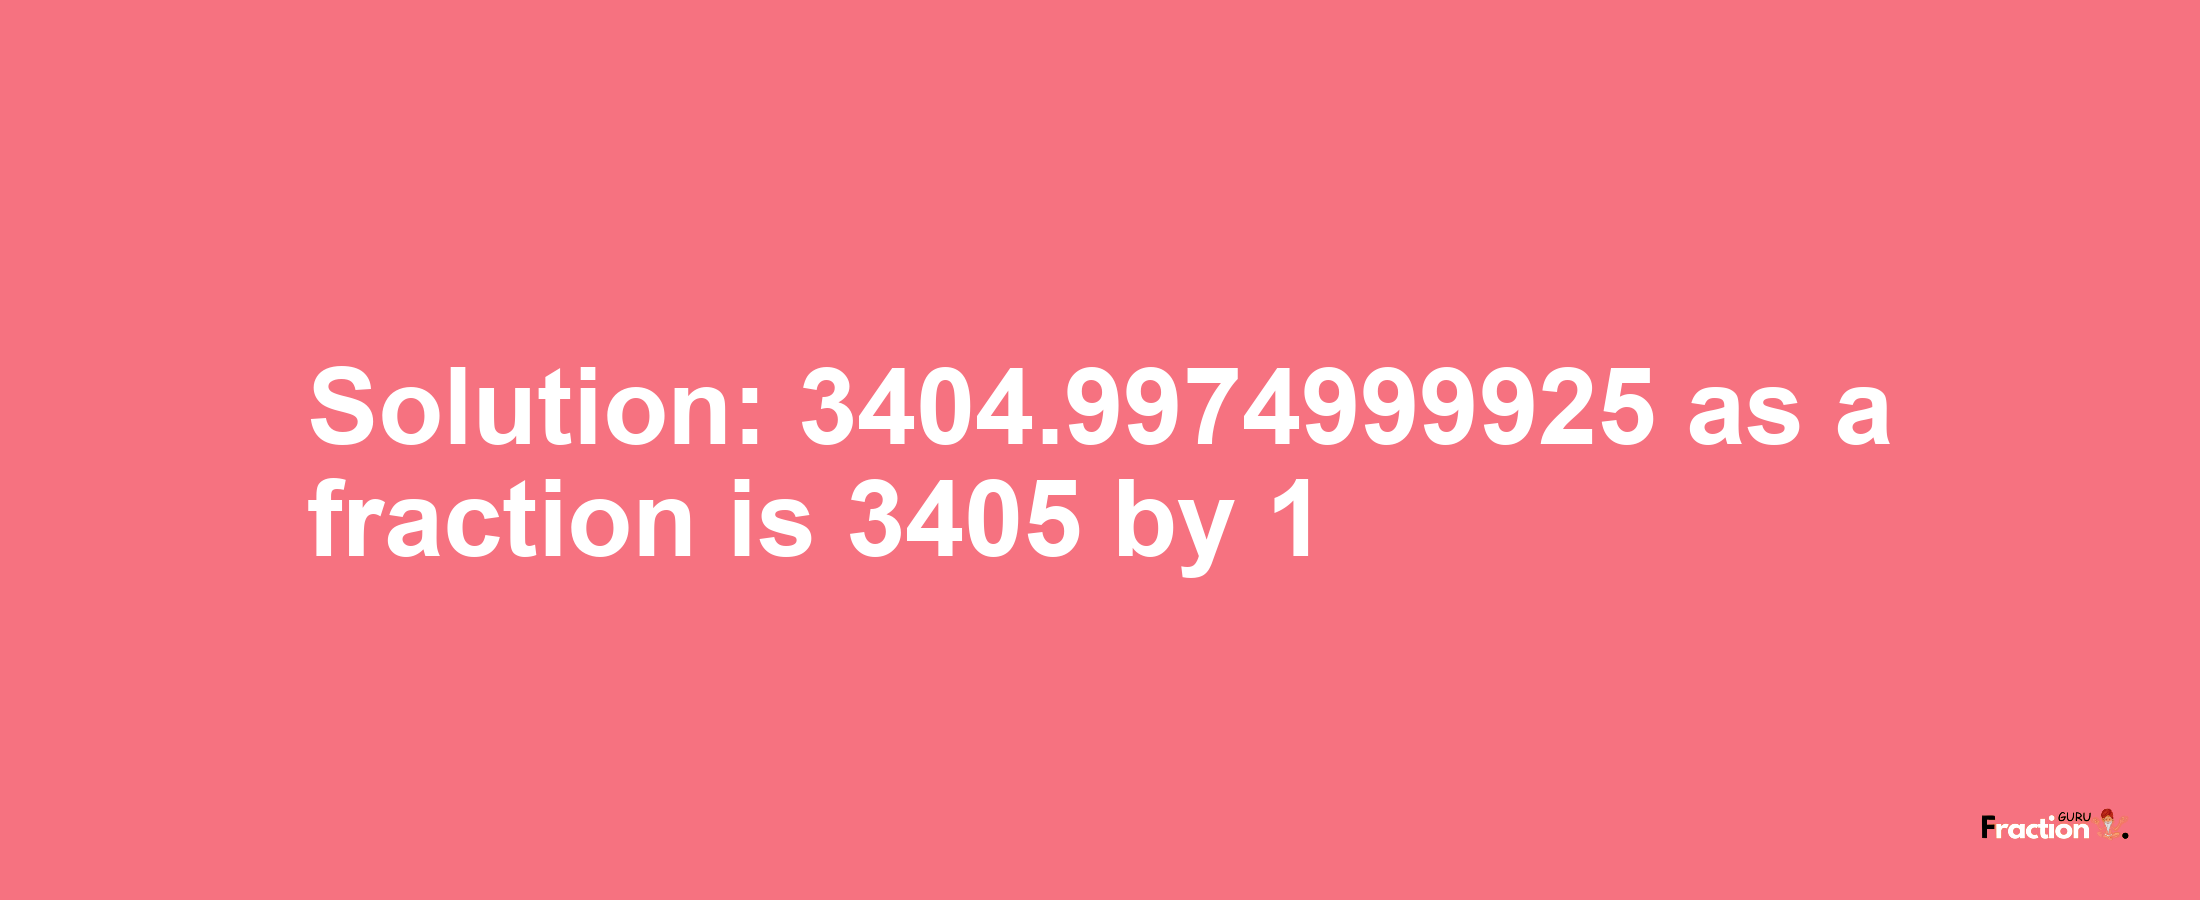 Solution:3404.9974999925 as a fraction is 3405/1